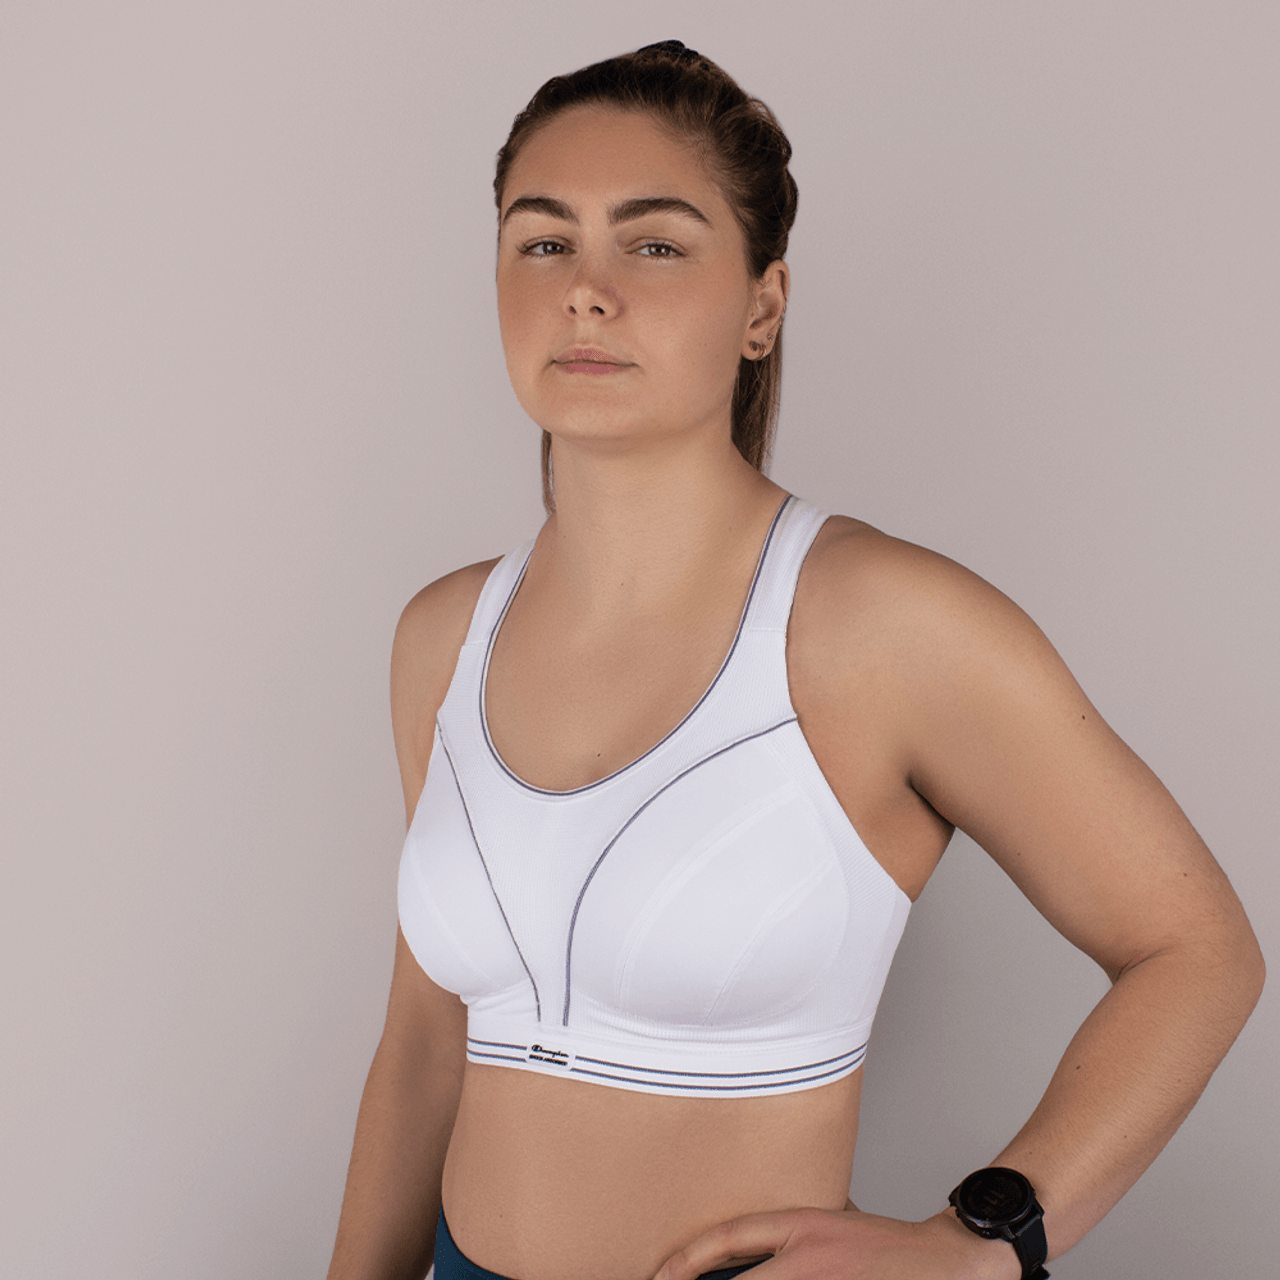 Shock Absorber Bras - Stay Fit & Comfortable with Shock Absorber